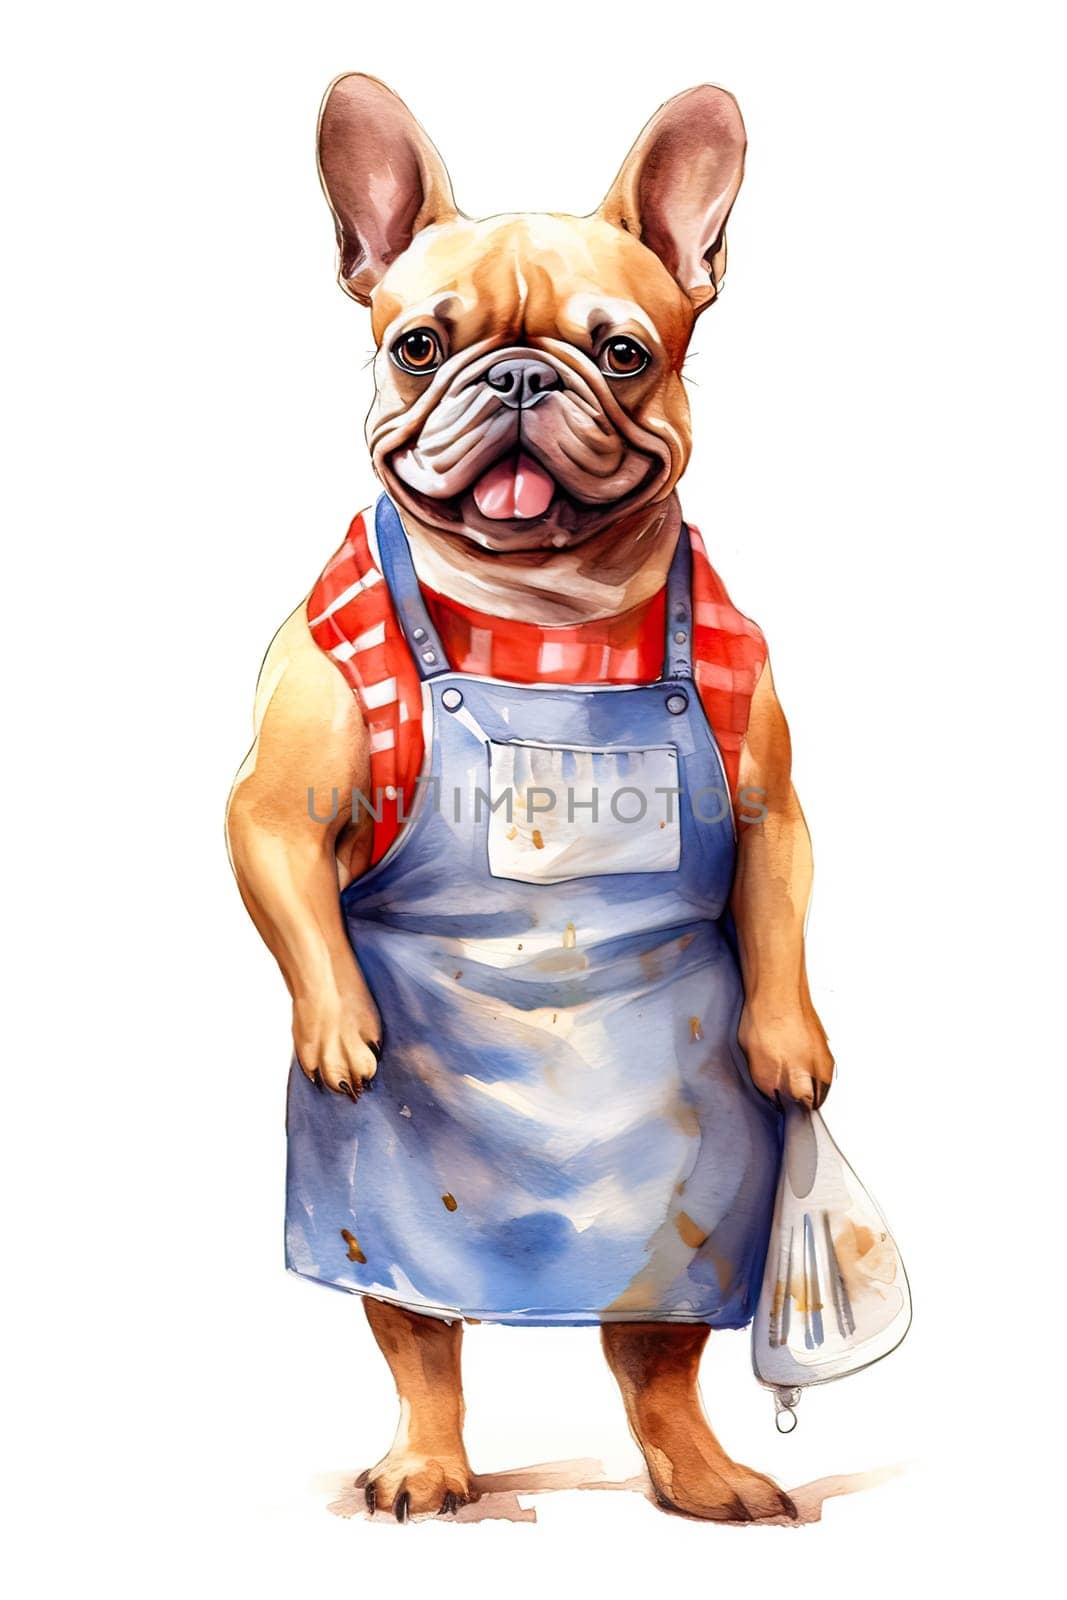 Brighten up your kitchen decor with a watercolor French bulldog donning a chefs hat and apron, adding charm to culinary themed projects and designs.